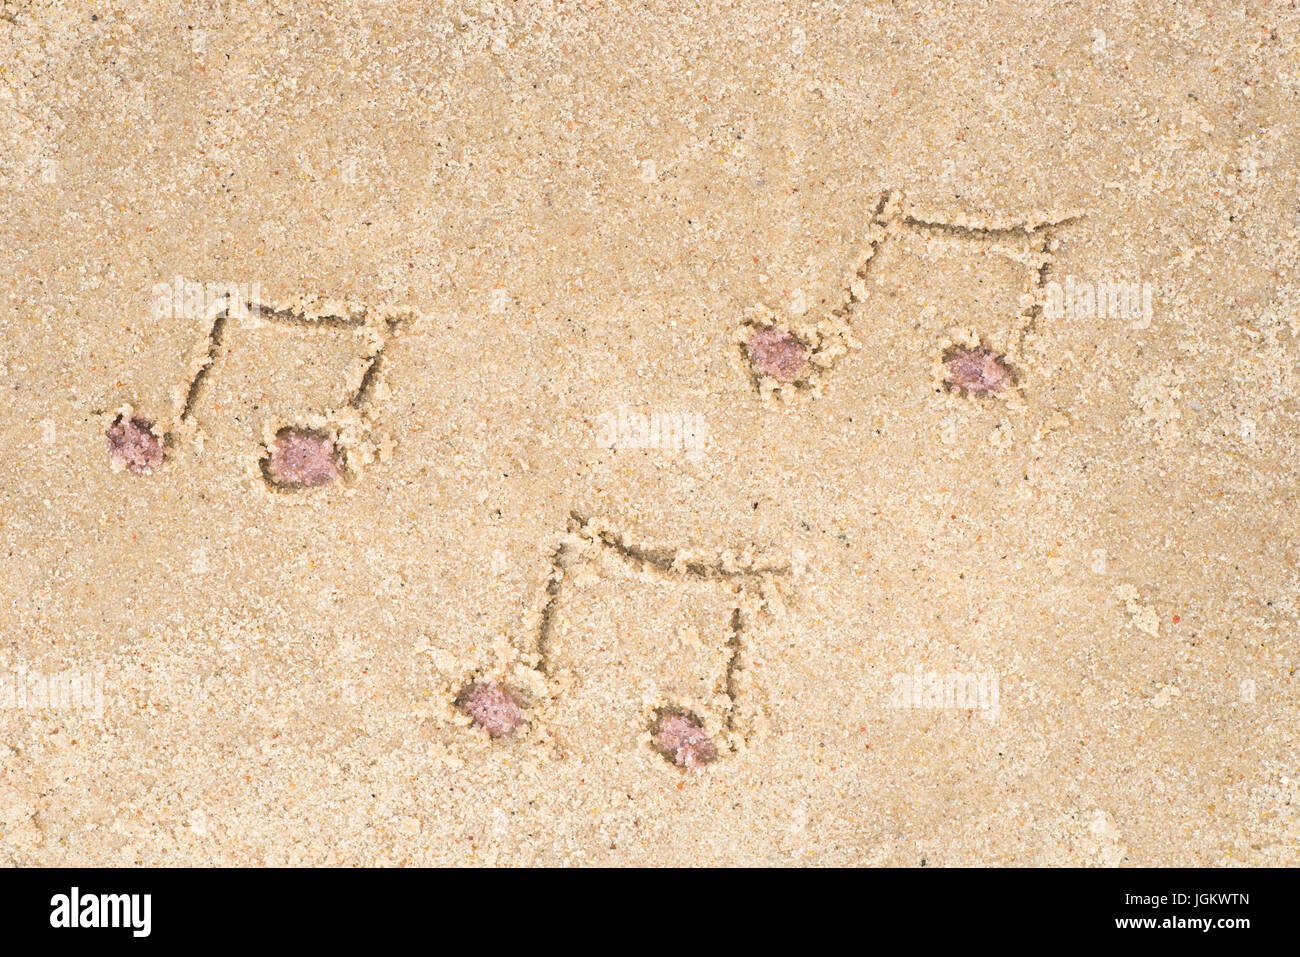 music notes drawing in sand background Stock Photo